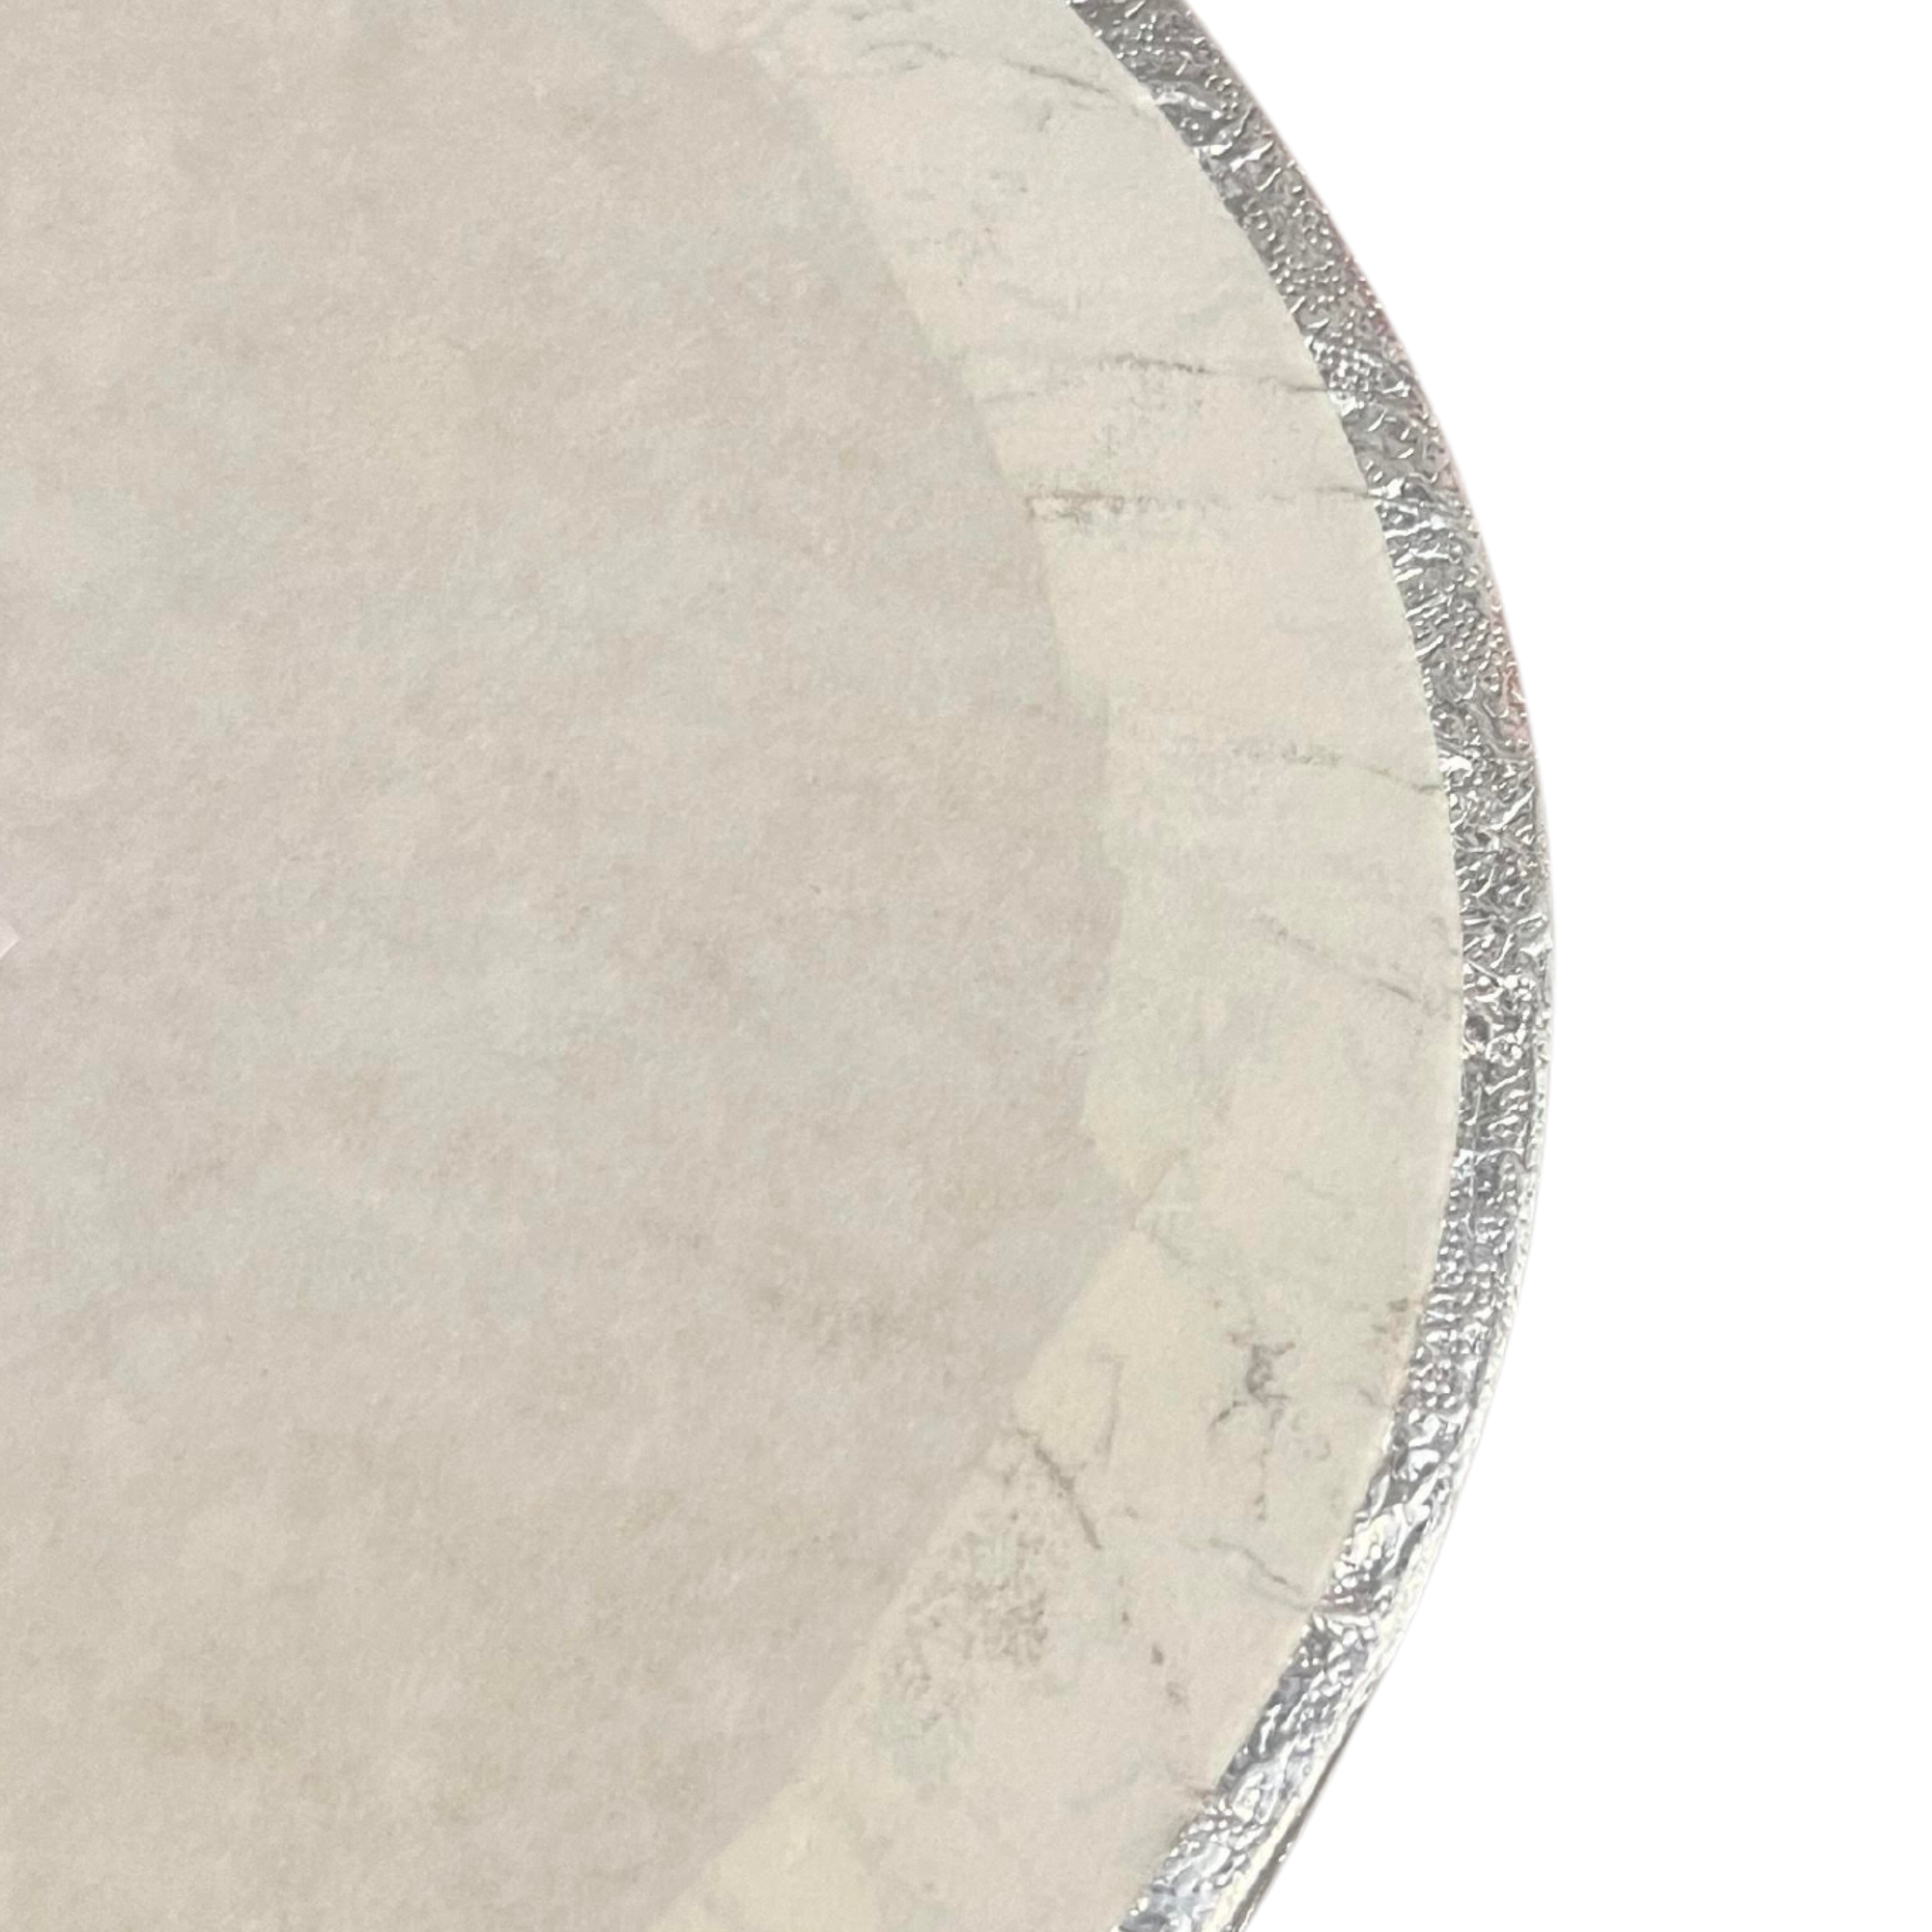 SECONDS - Oval Cake Drum 12mm Thick Cake Board - Silver - 12" x 10"